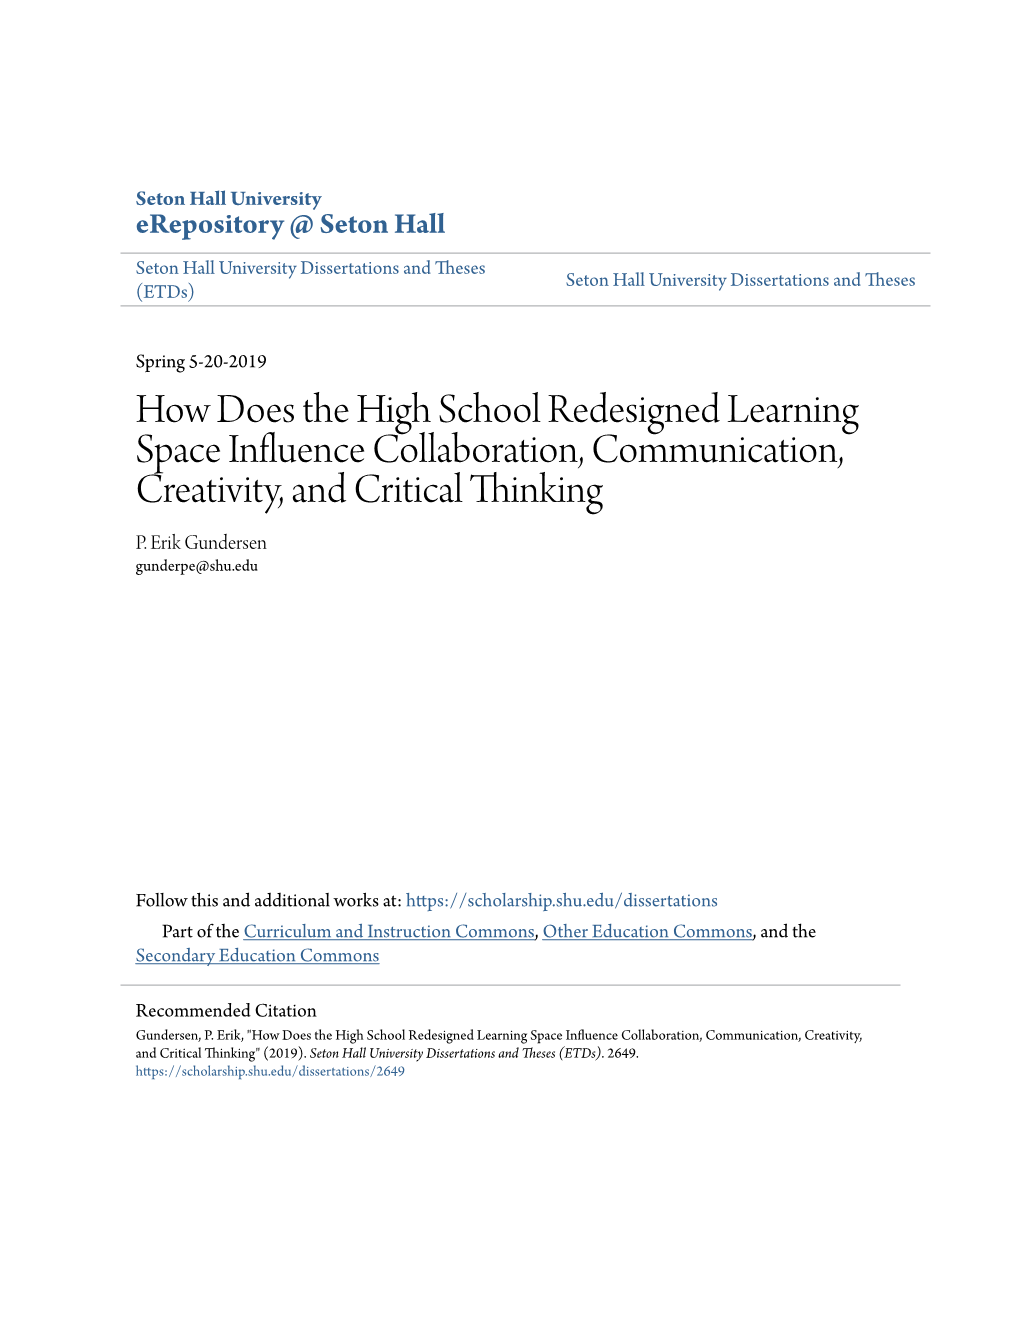 How Does the High School Redesigned Learning Space Influence Collaboration, Communication, Creativity, and Critical Thinking P